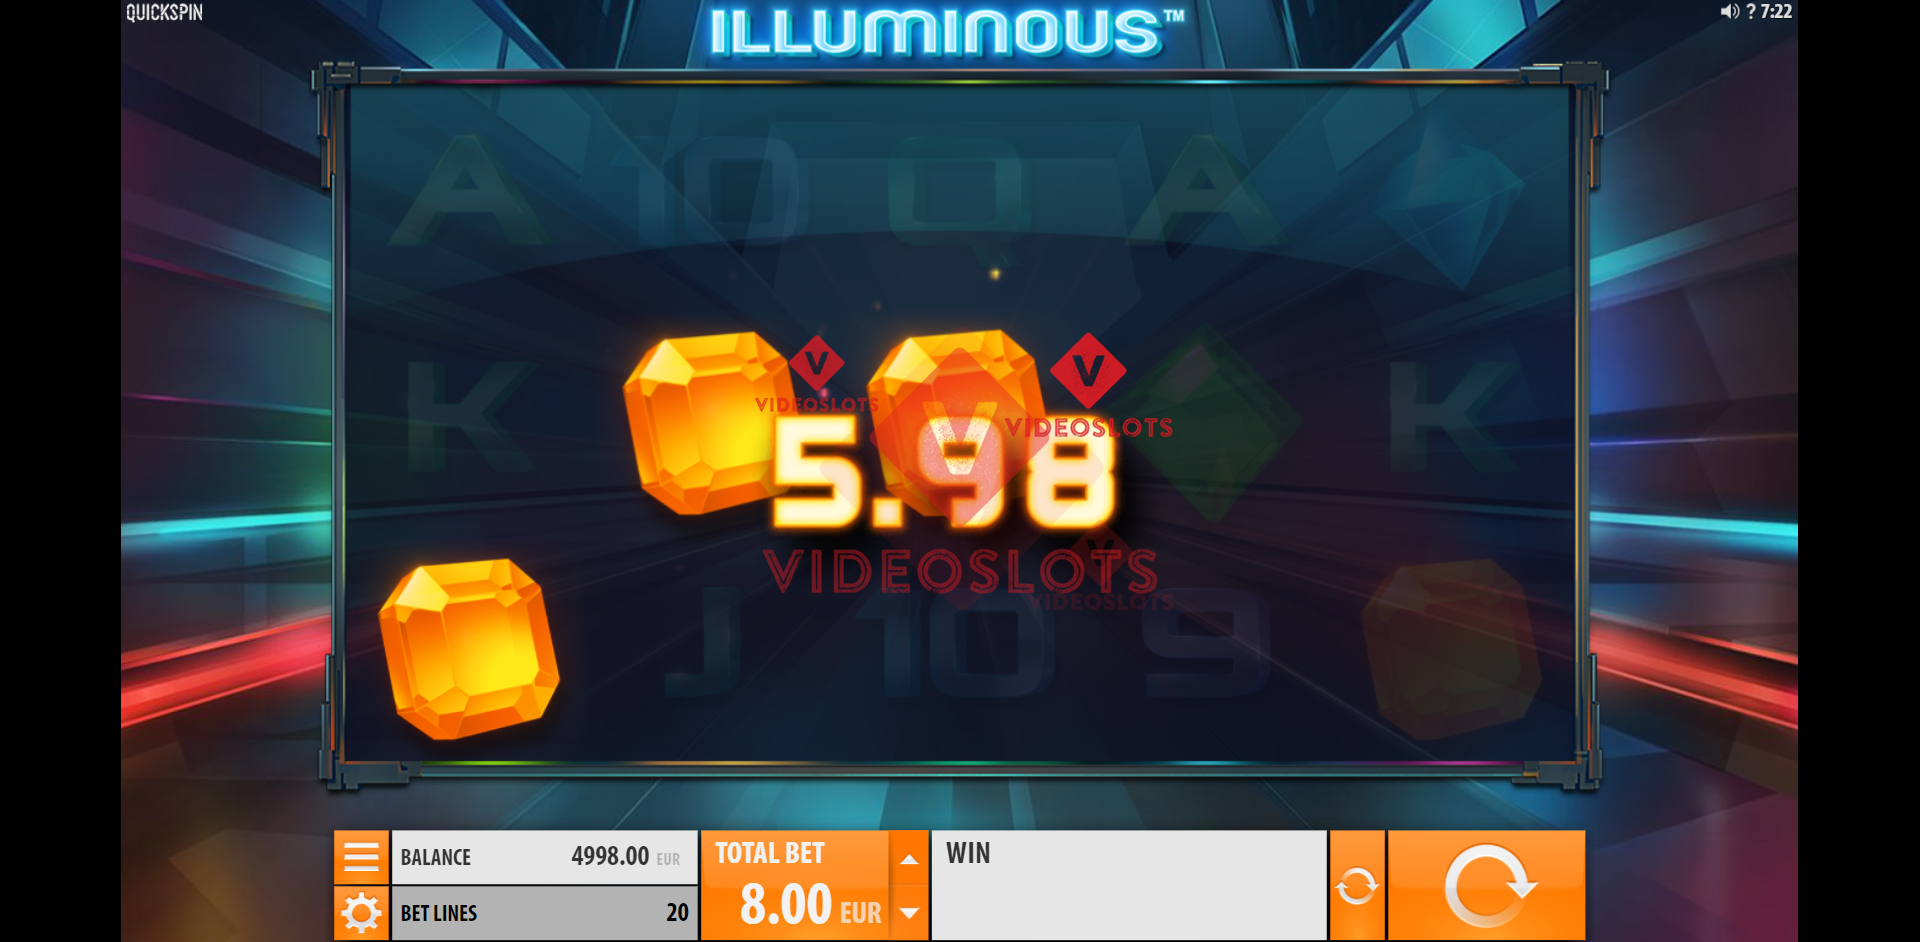 Base Game for Illuminous slot from Quickspin